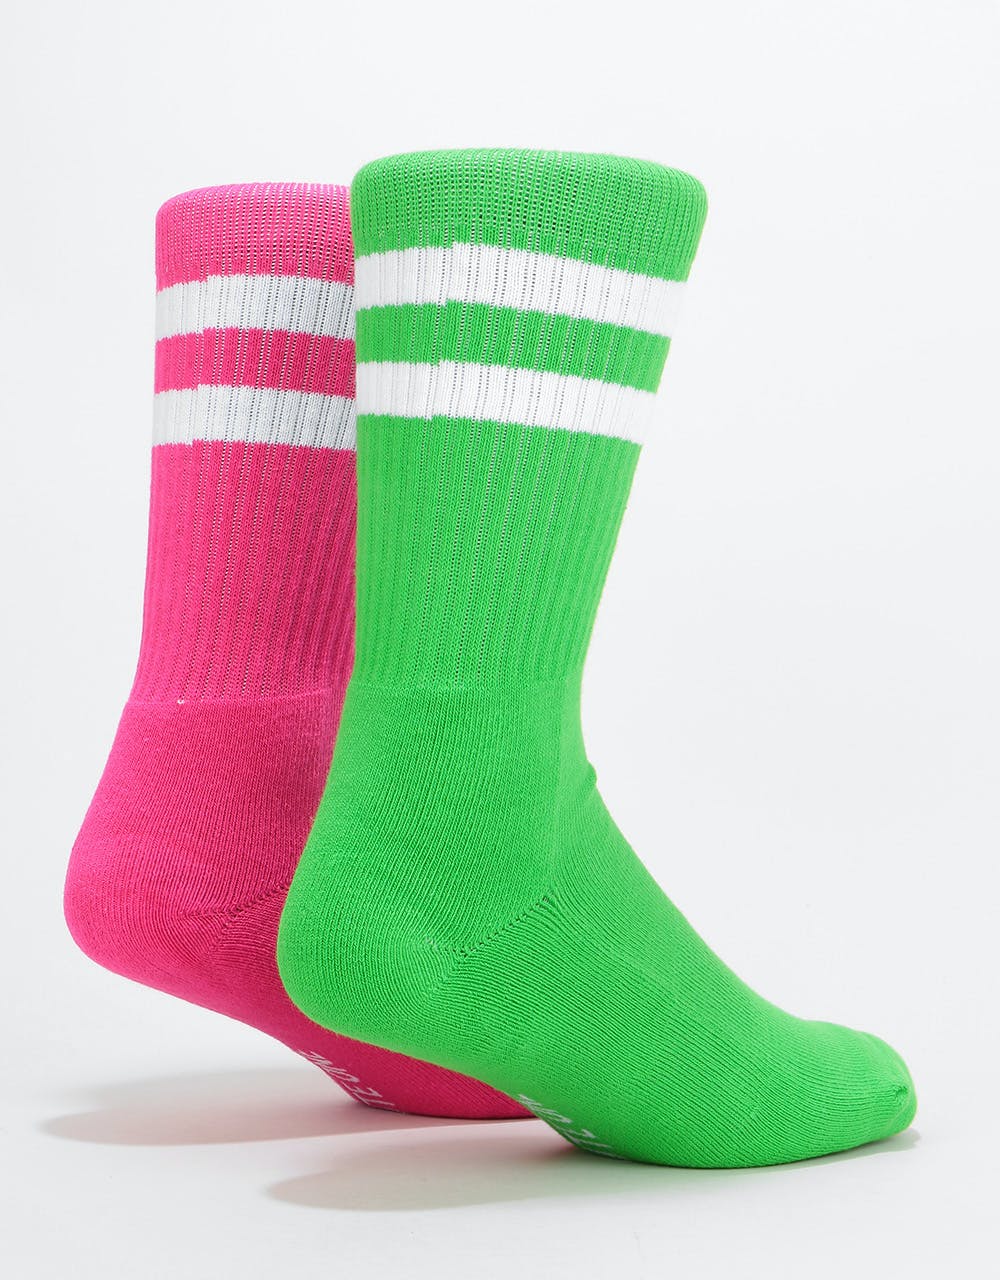 Route One Classic Crew Socks 2 Pack - Neon Green/Neon Pink